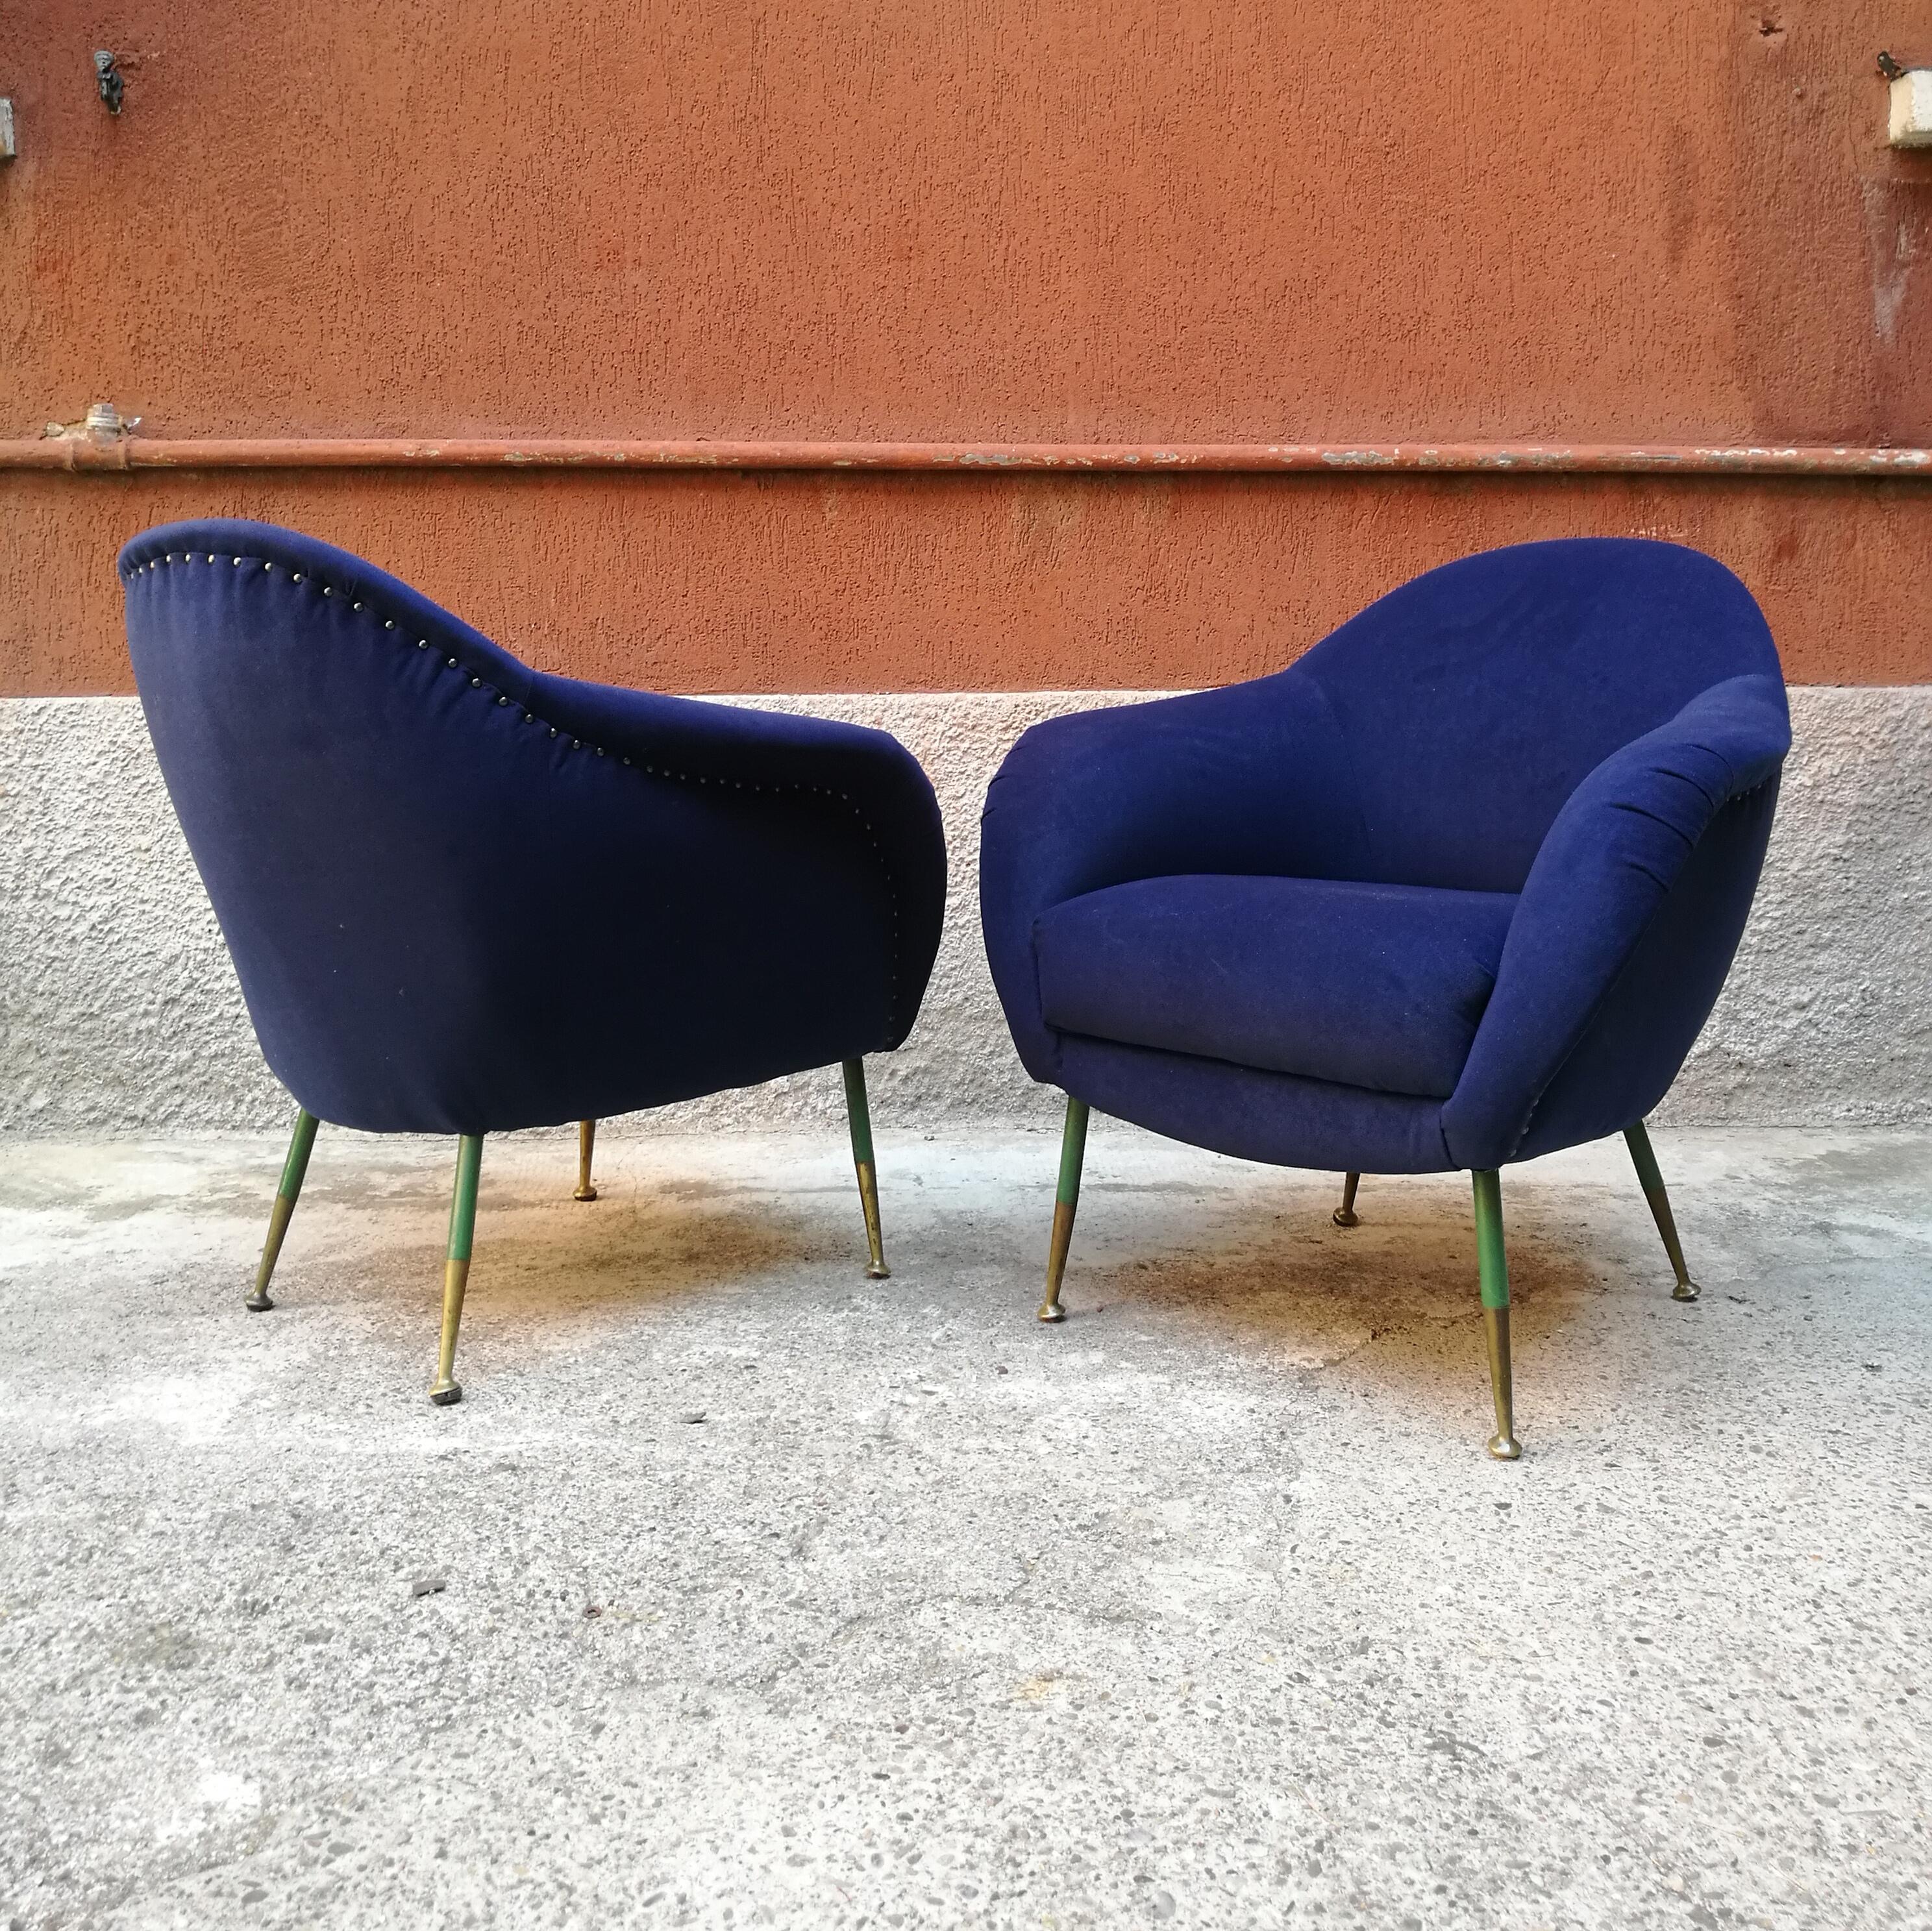 Mid-20th Century Pair of Midcentury Armchairs in Fabric Blu with Green Legs and Brass, 1960